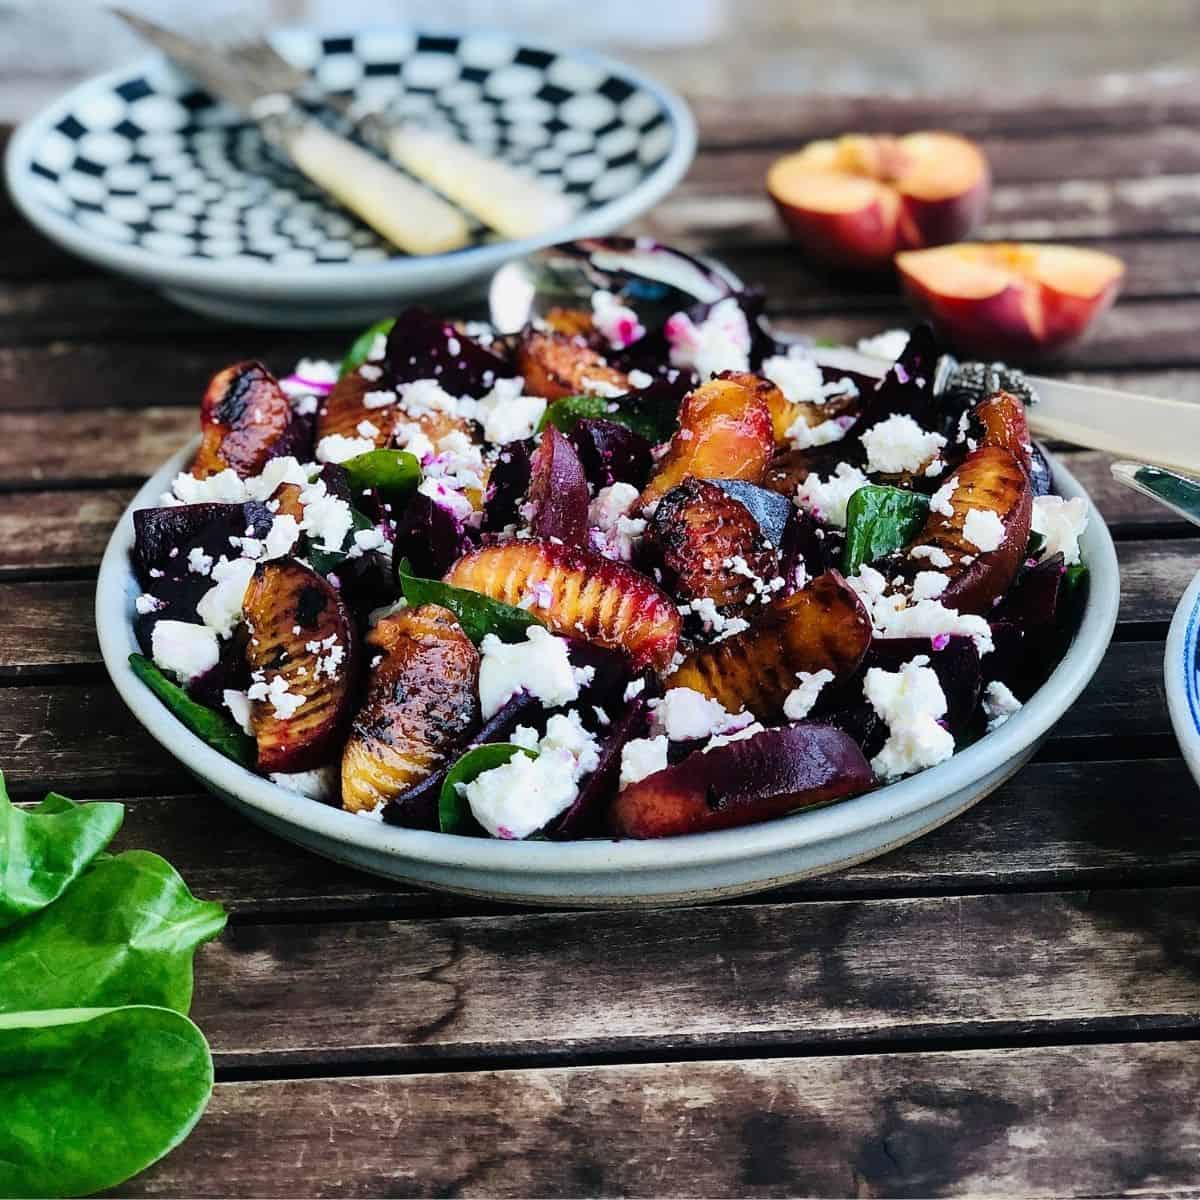 A Plate of beetroot, peach and feta salad